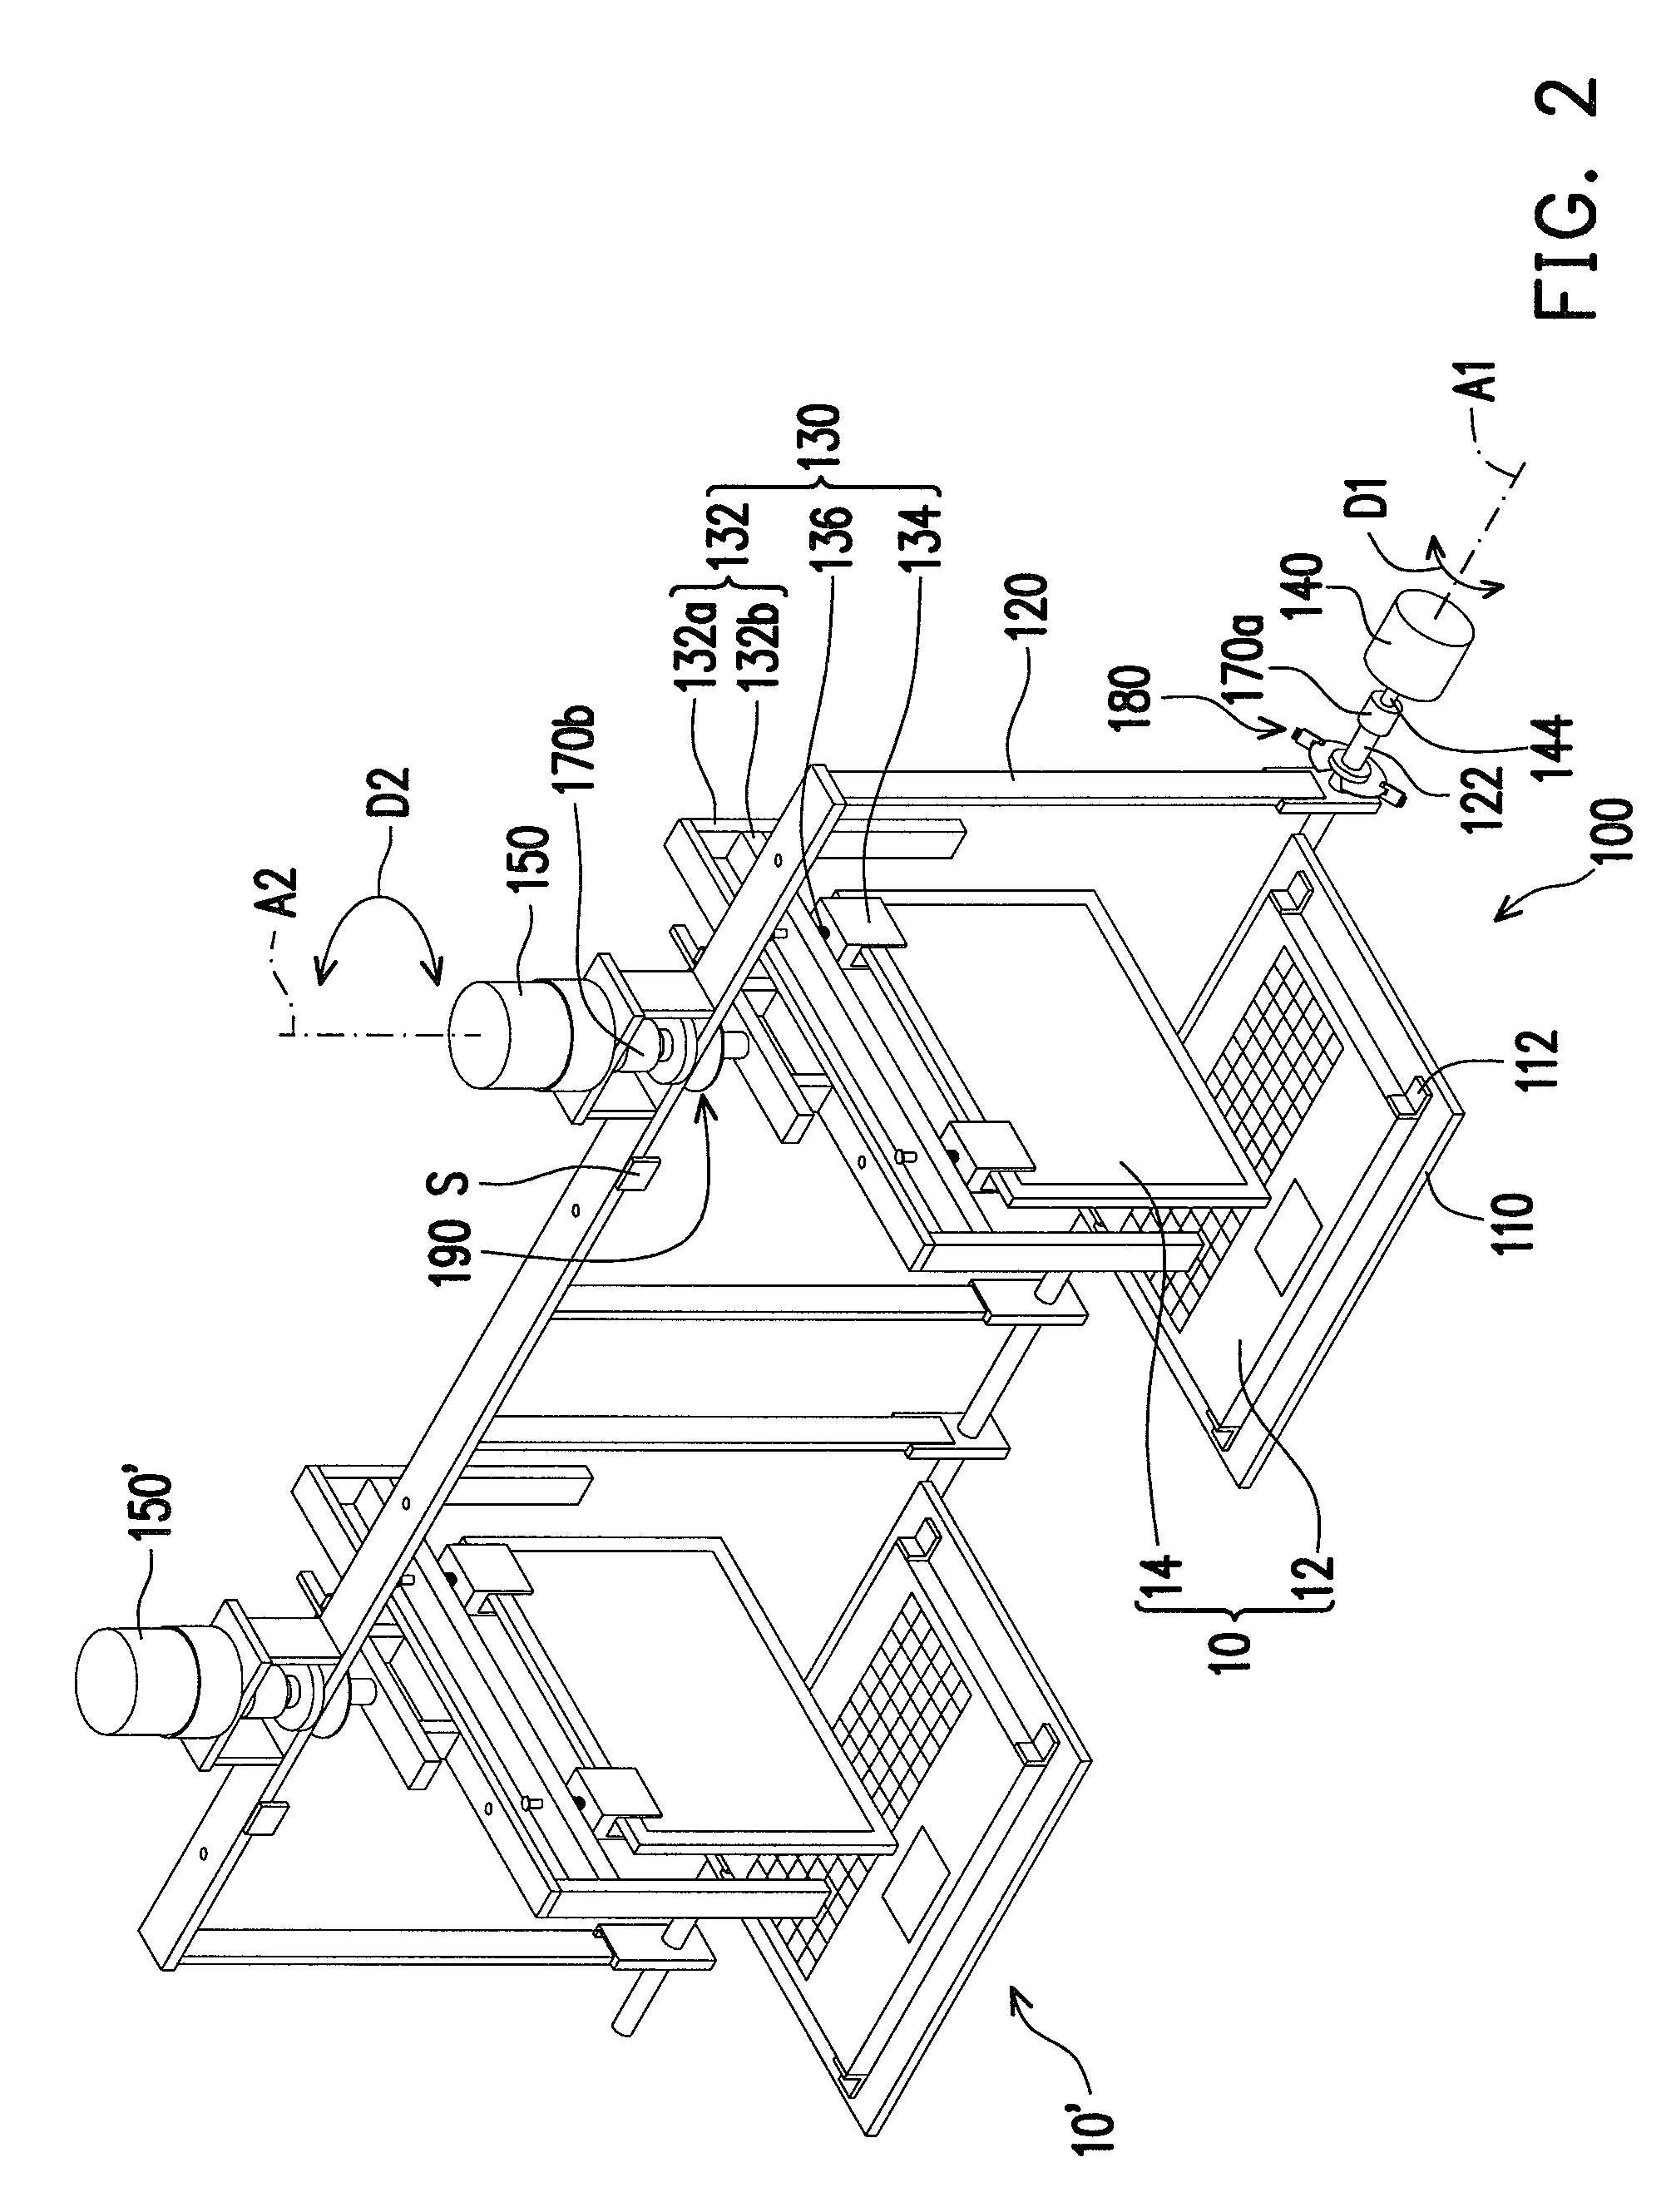 Testing device for an electronic device having two pivot points